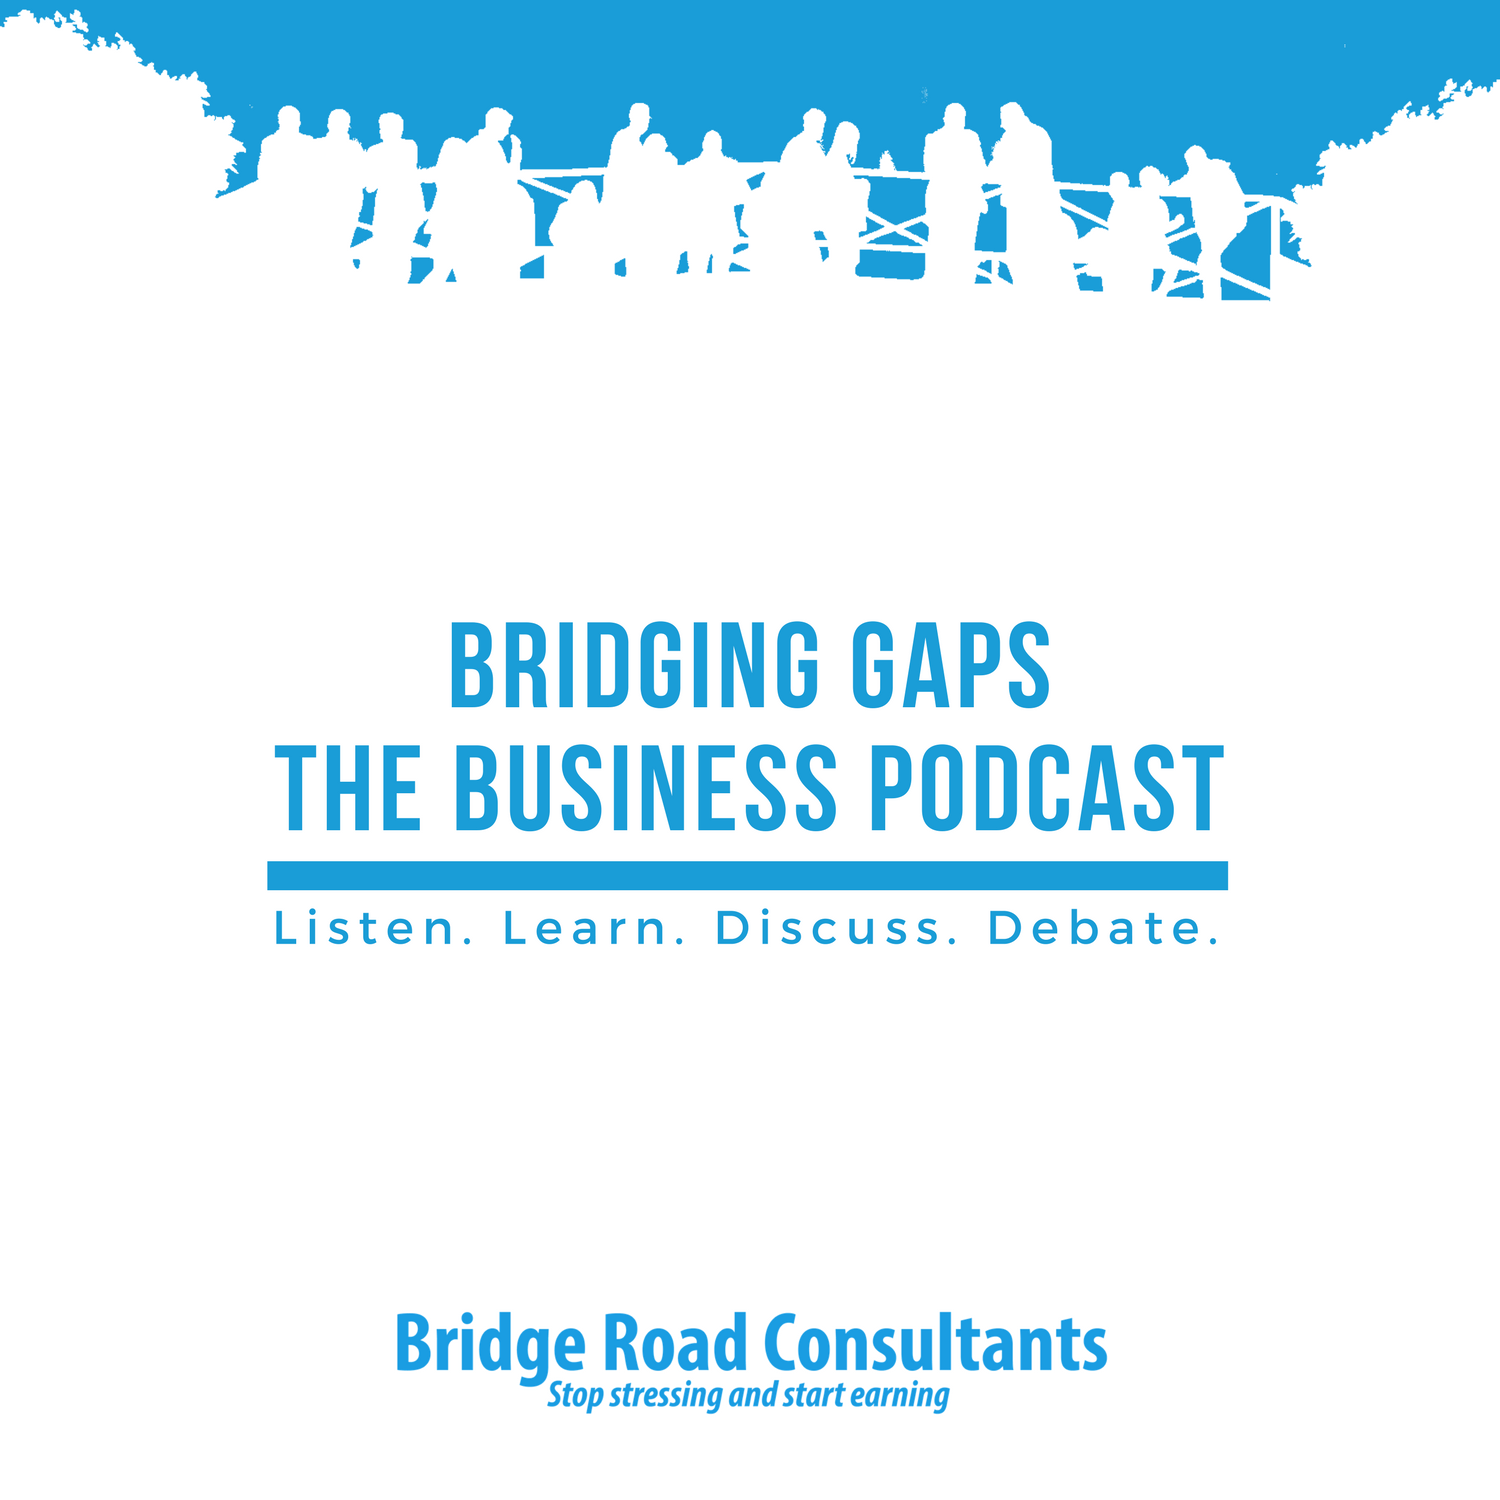 Bridging Gaps - The Business Podcast